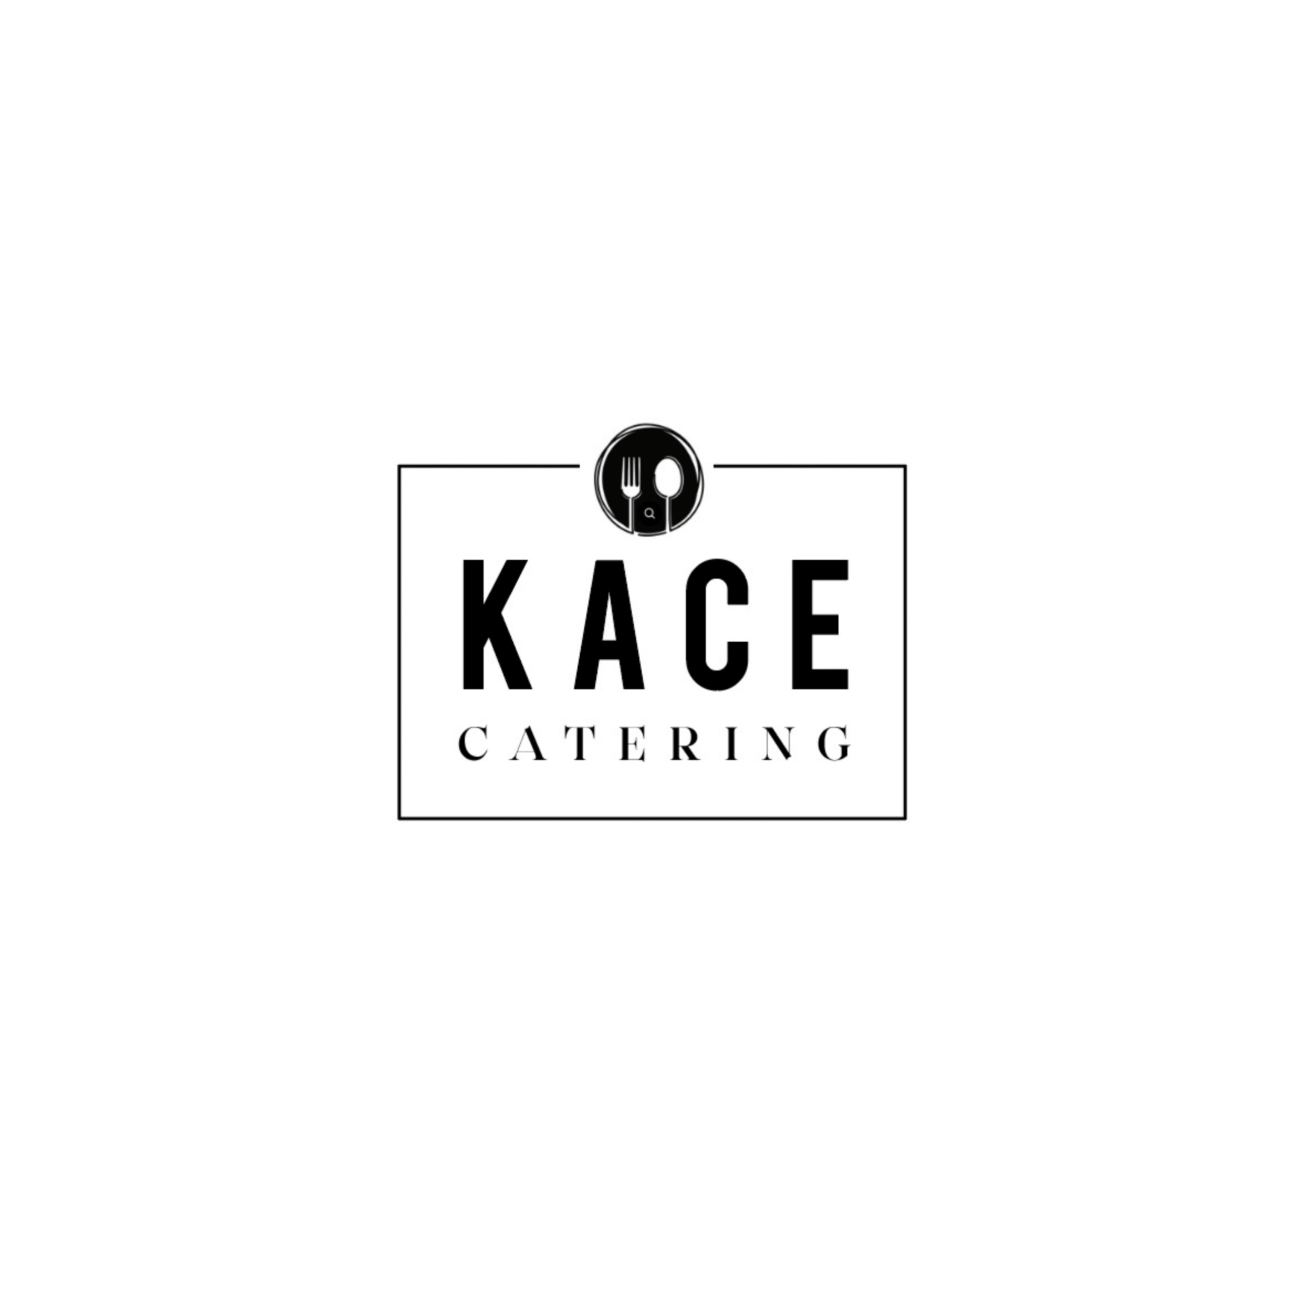 catering business logo